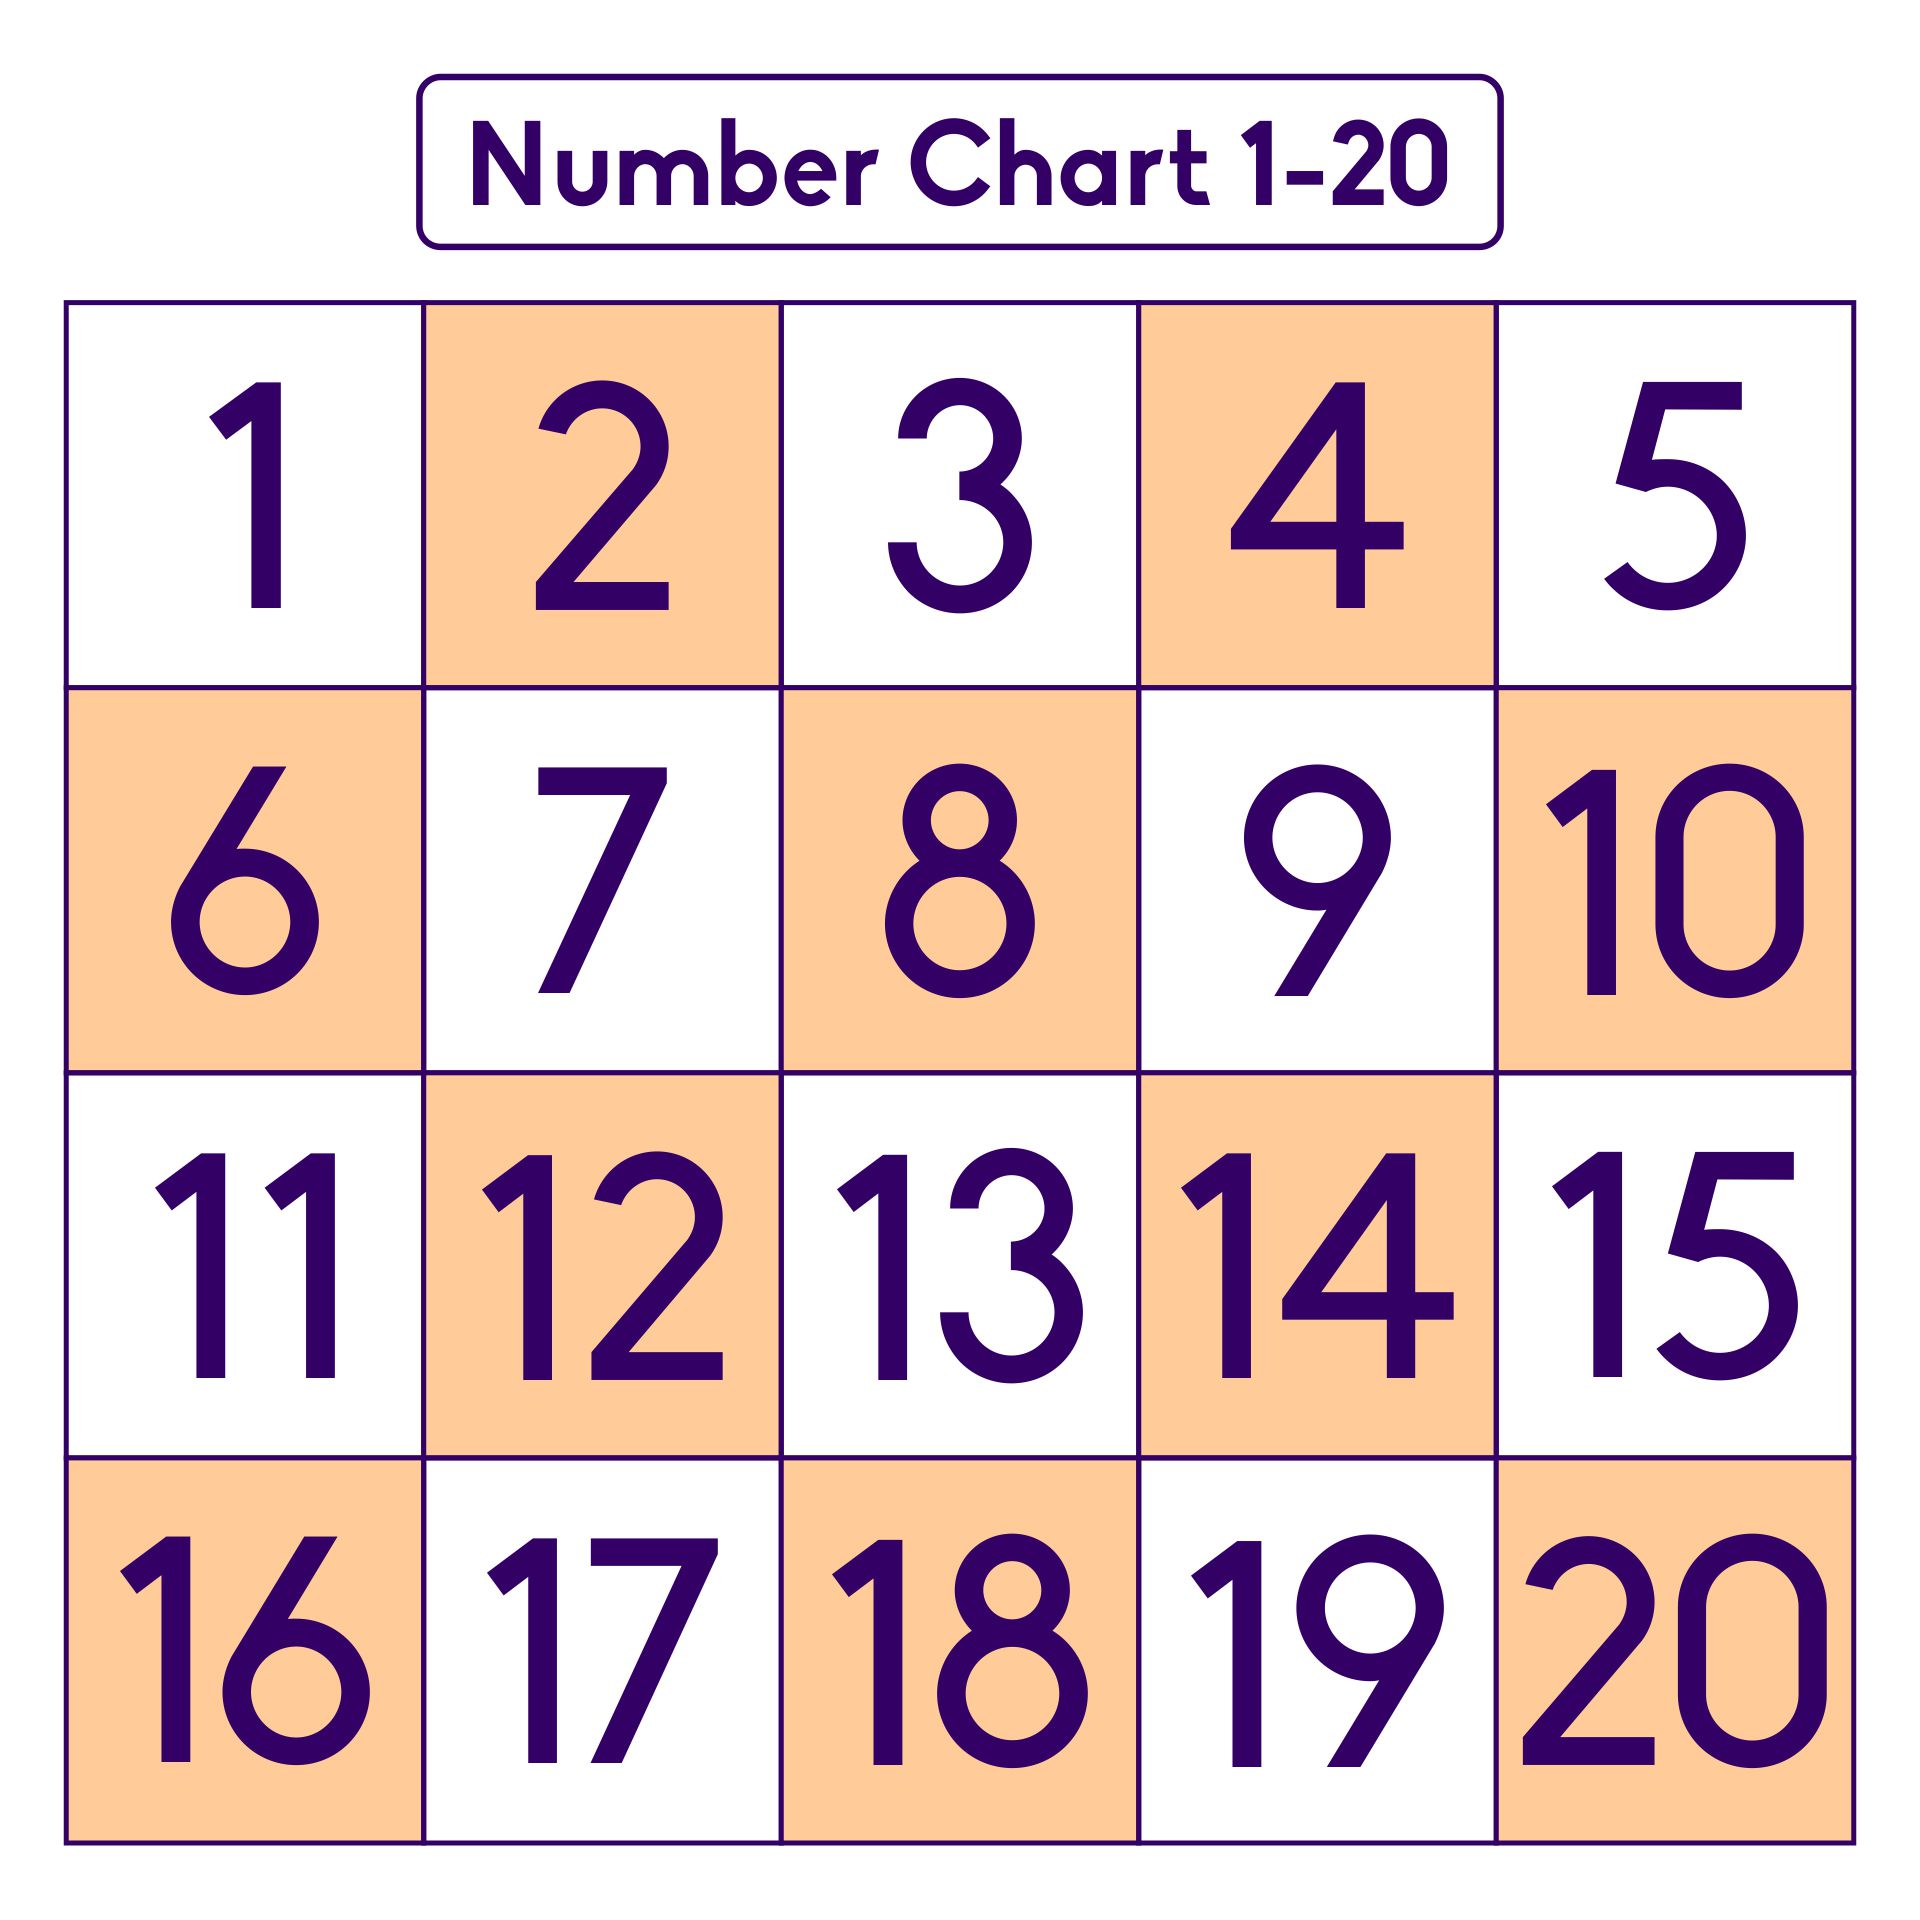 8-best-images-of-number-chart-1-500-printable-printable-number-chart-1-50-number-chart-1-100